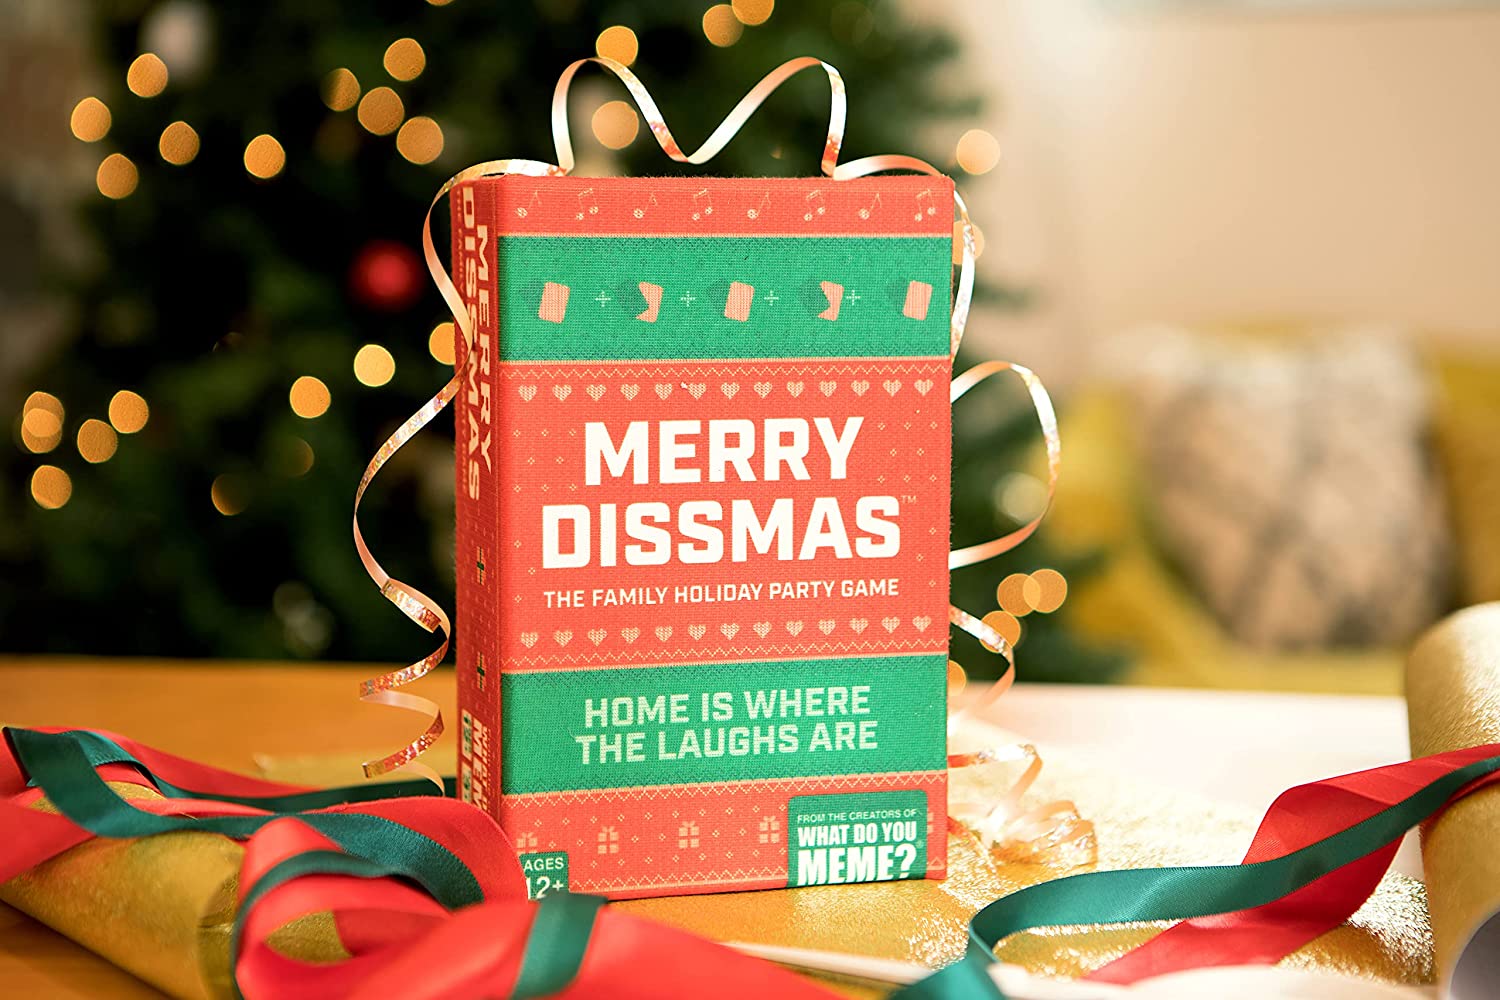 Merry Dissmas - the Holiday Family Party Game from What Do You Meme? - image 4 of 8